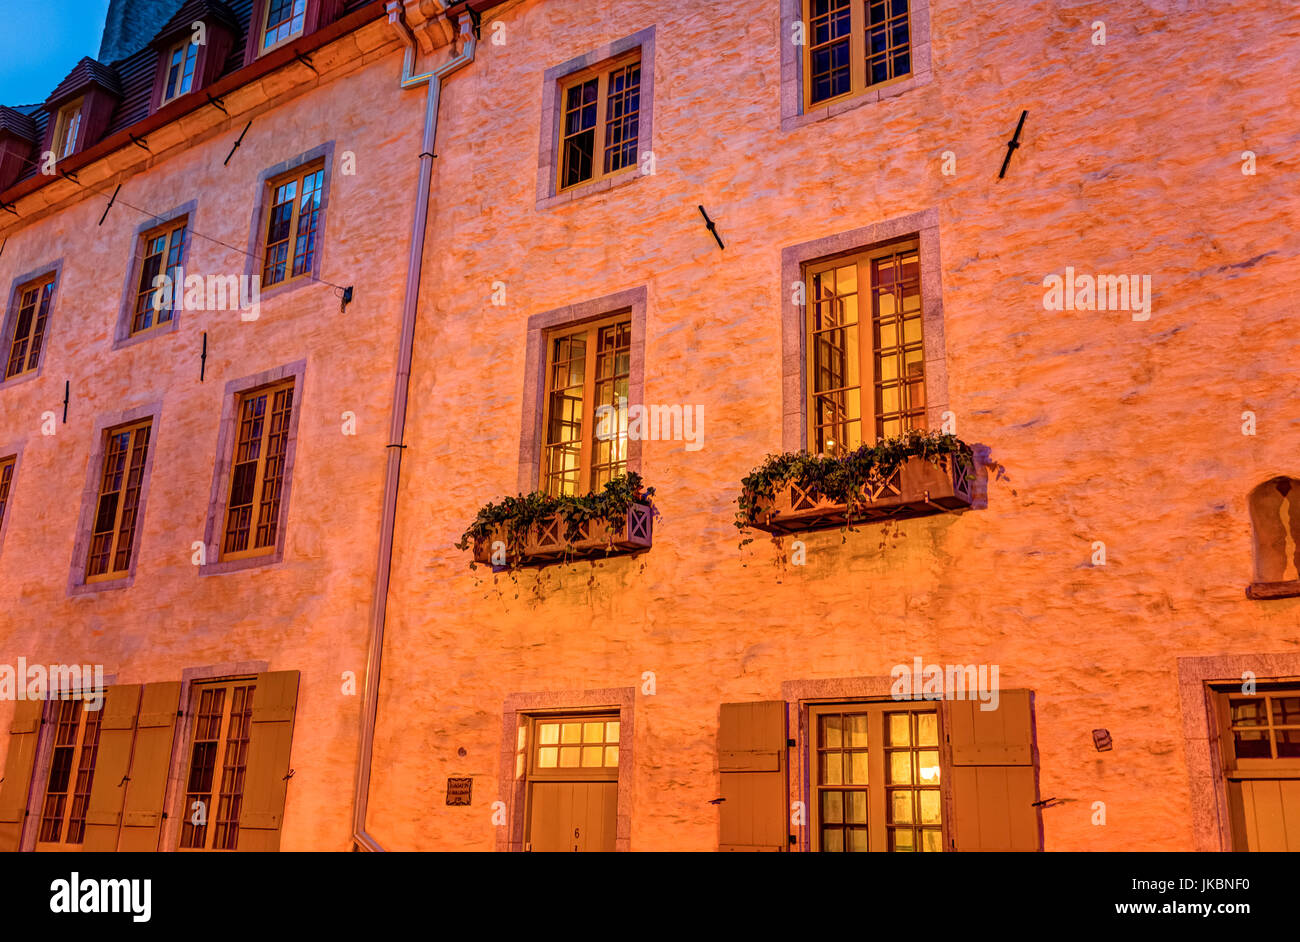 Quebec City, Canada - May 31, 2017: Colorful orange stone building closeup on street during twilight in lower old town Stock Photo